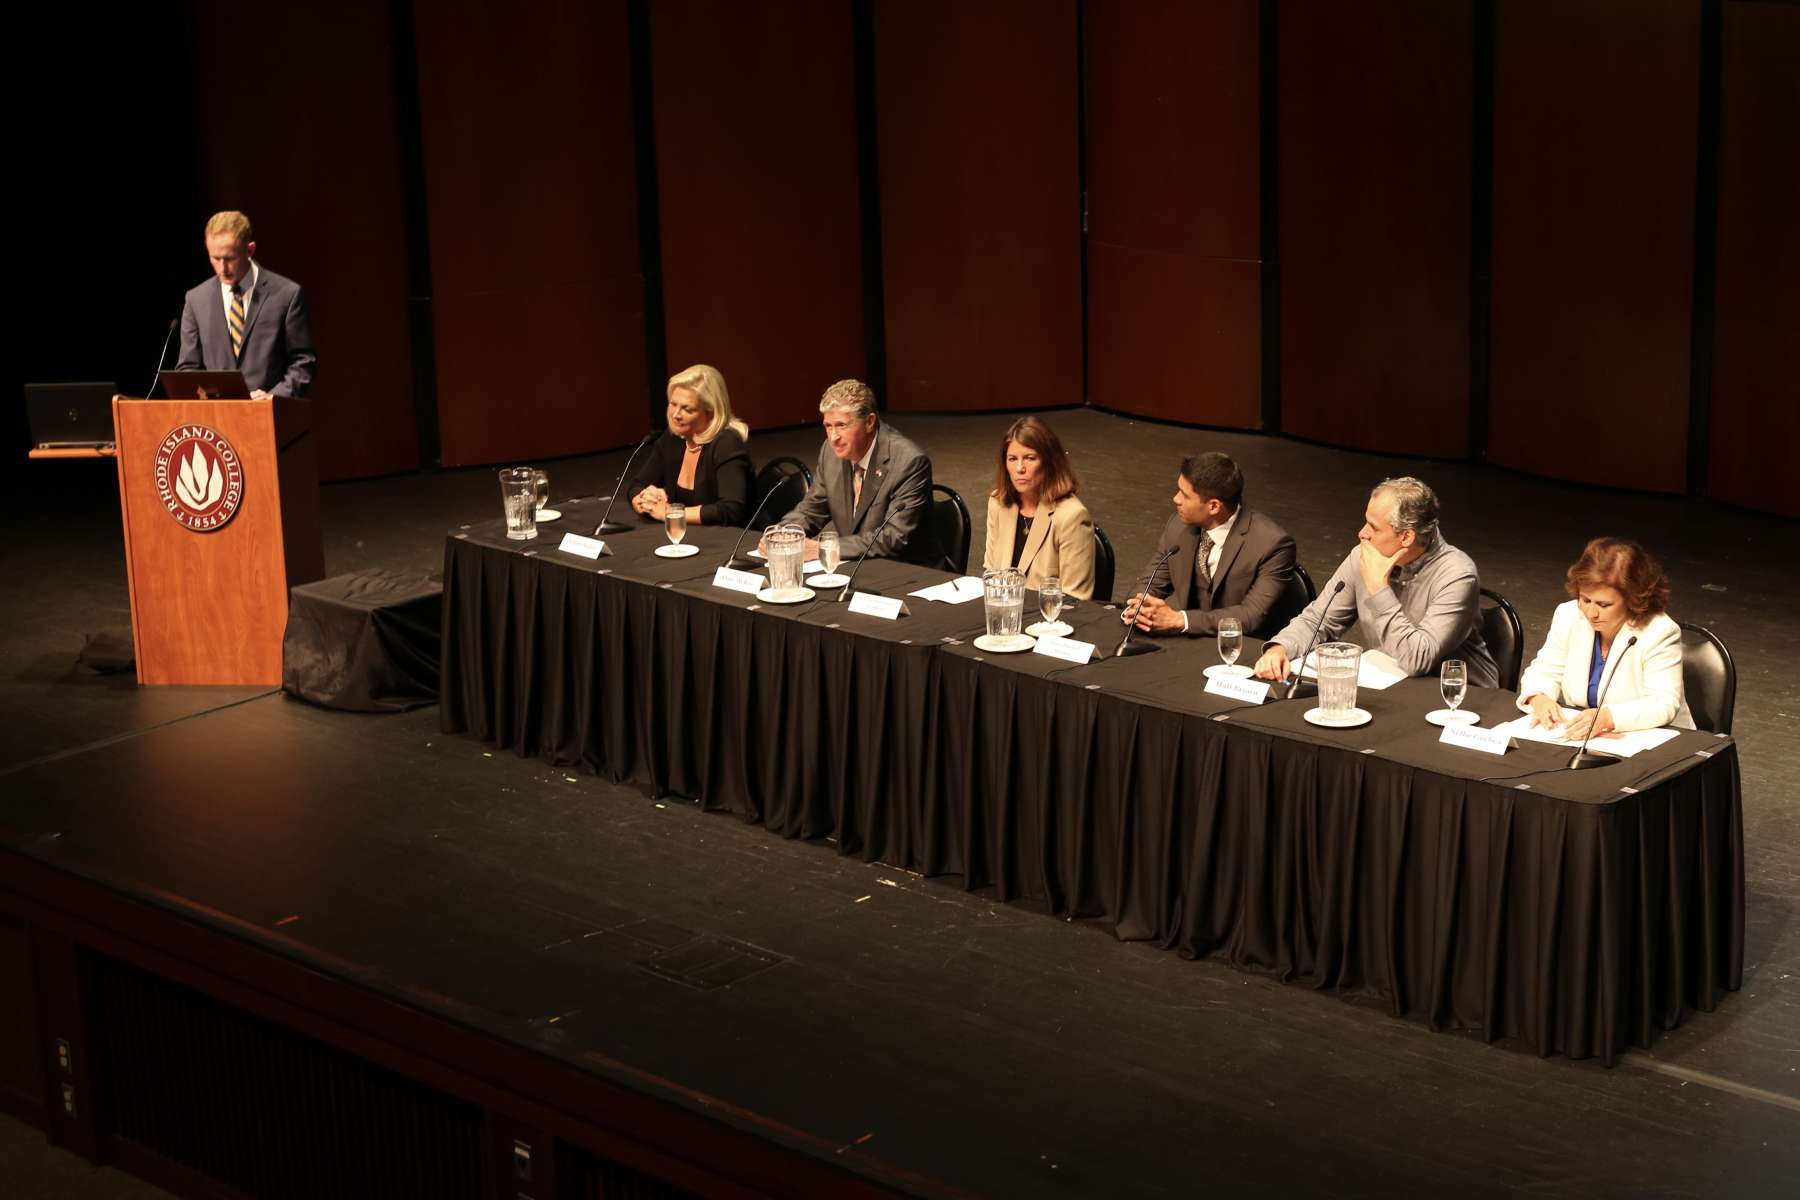 Candidates for governor grilled on enviro issues at climate forum